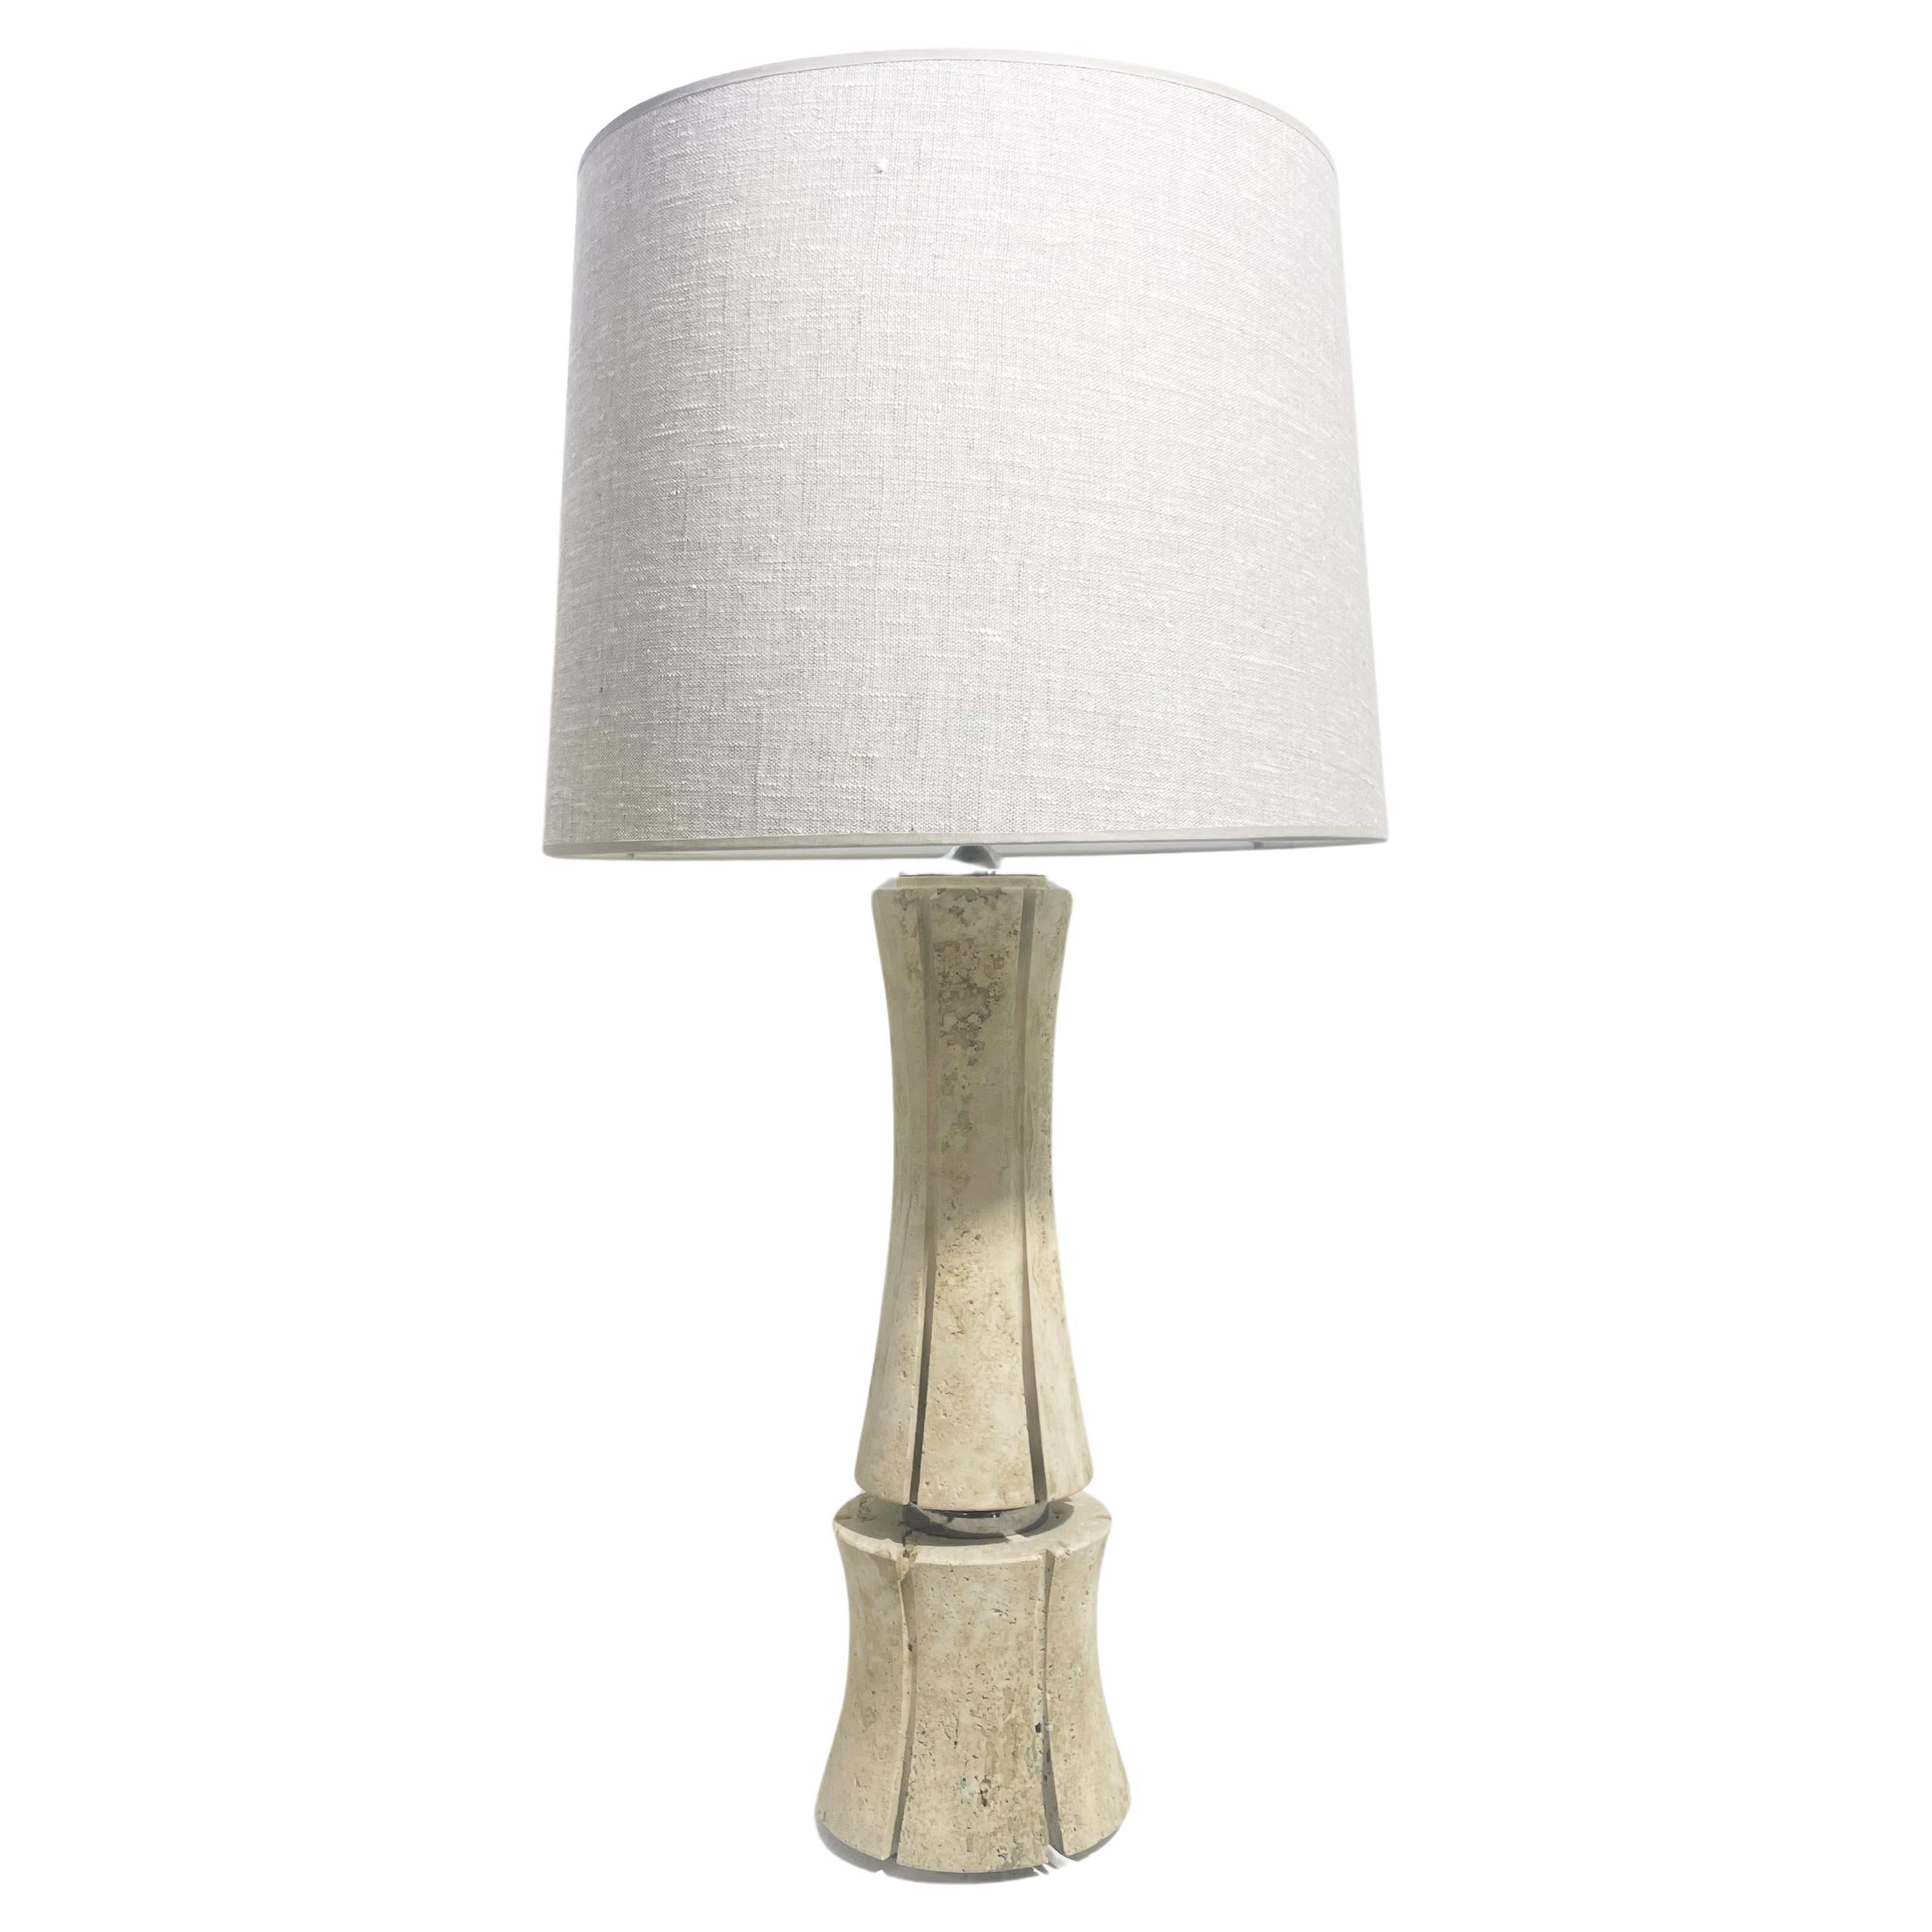 Mid-Century Modern Travertine Table Lamp, Italy, 1970s For Sale